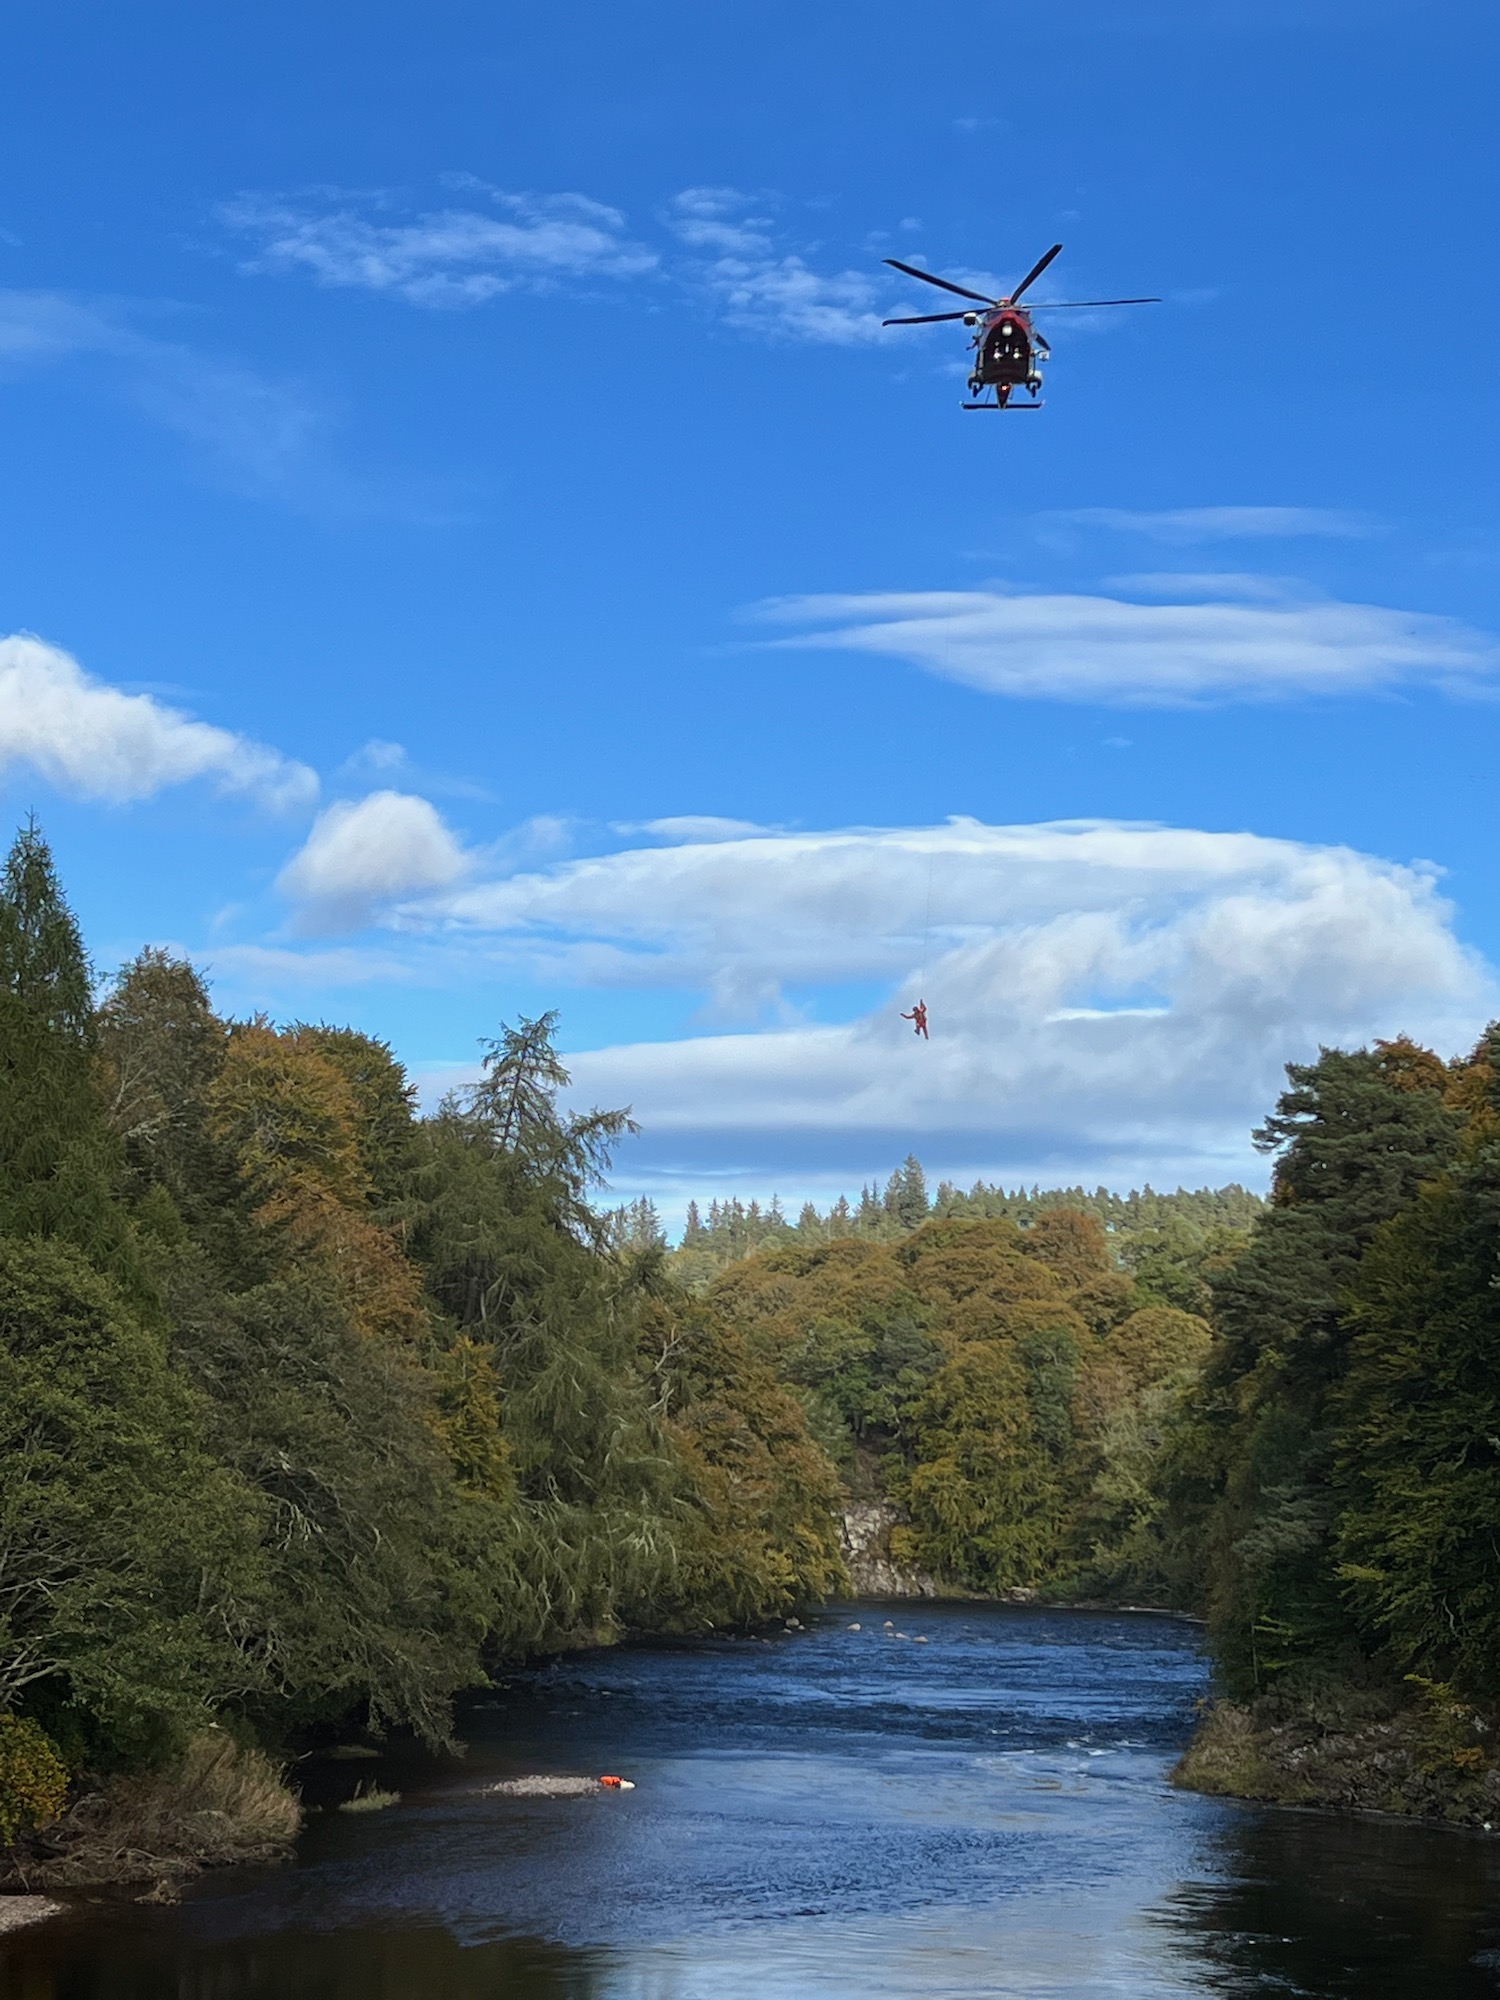 SFRS Exercise - helicopter over the river winching someone up